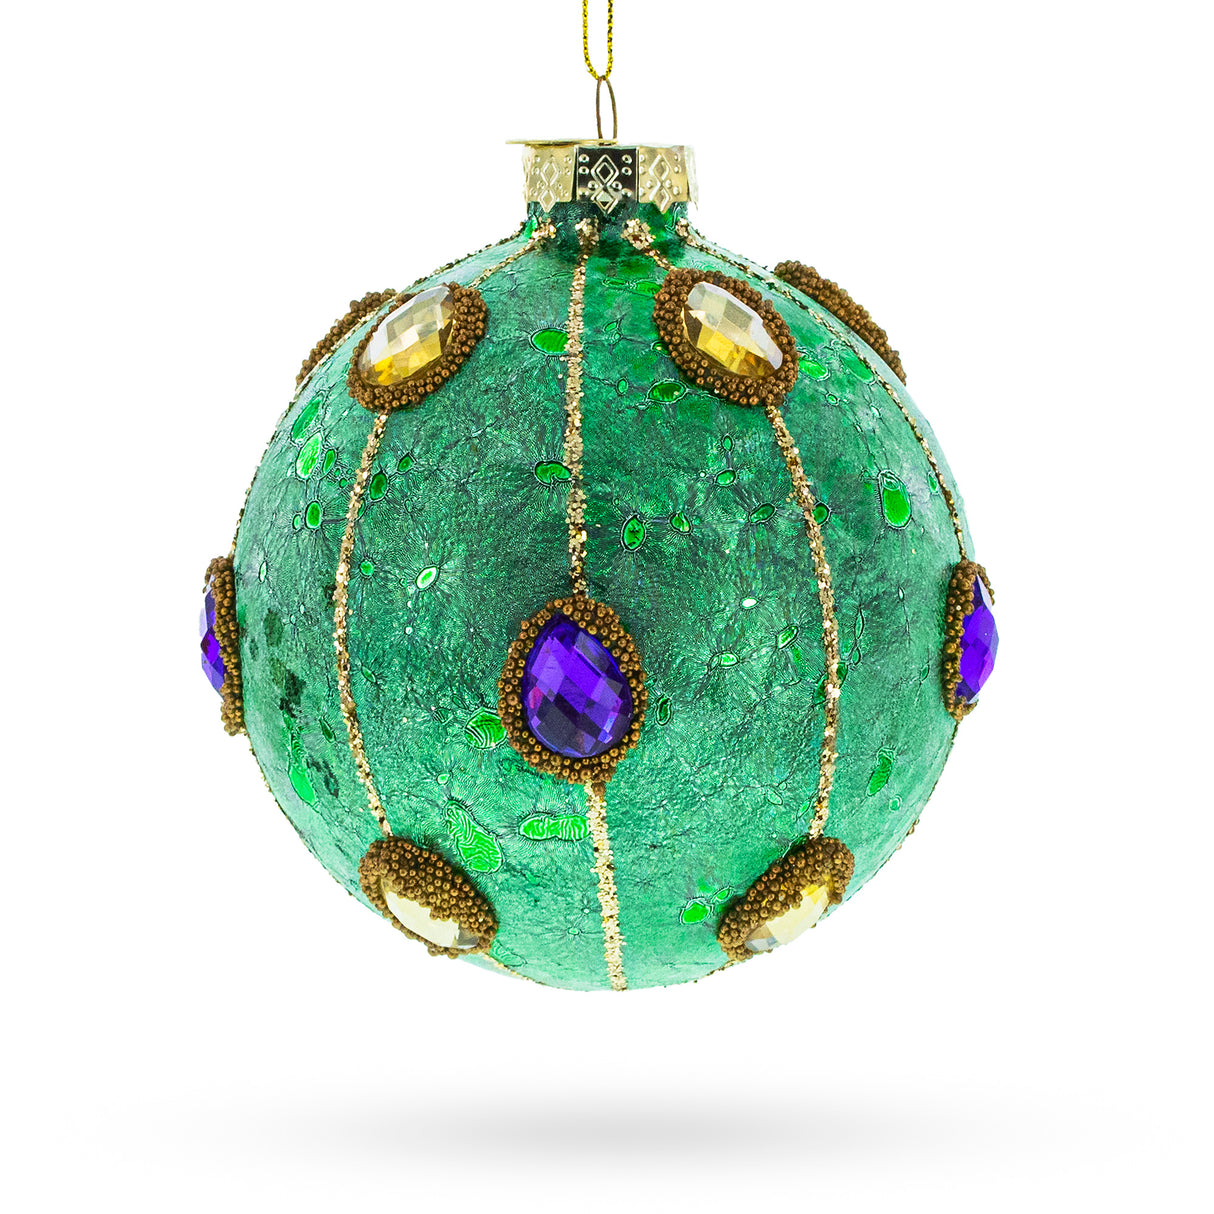 Jeweled Ball - Opulent Blown Glass Christmas Ornament in Green color, Round shape